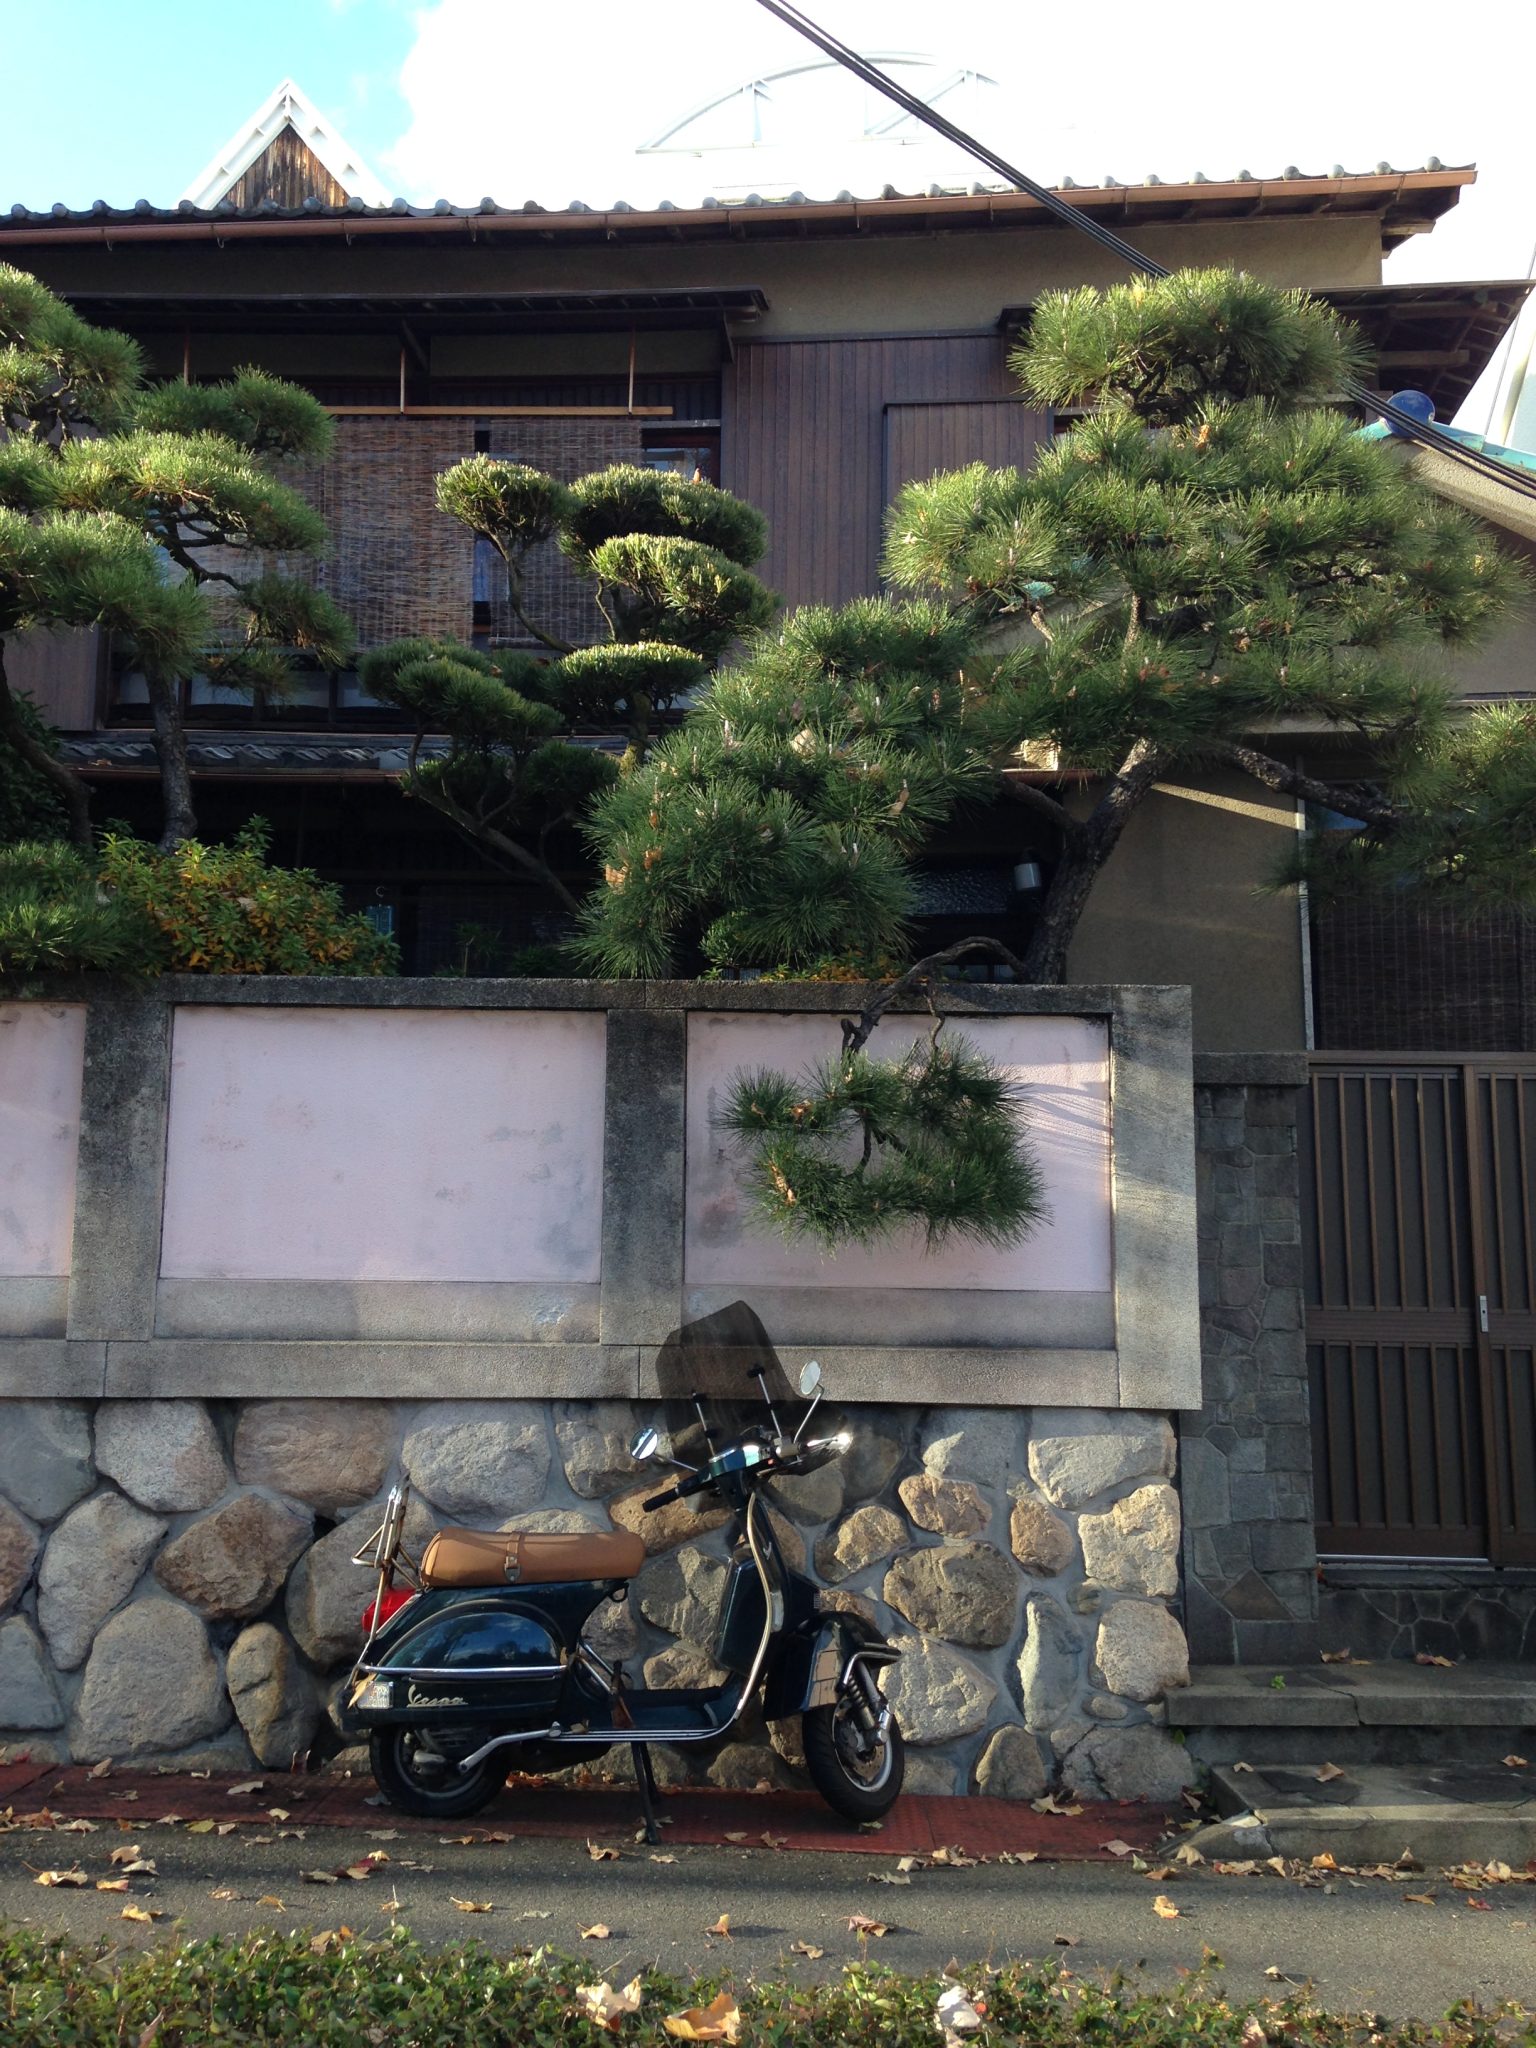 A Vespa motorbike in front of a Japanese house